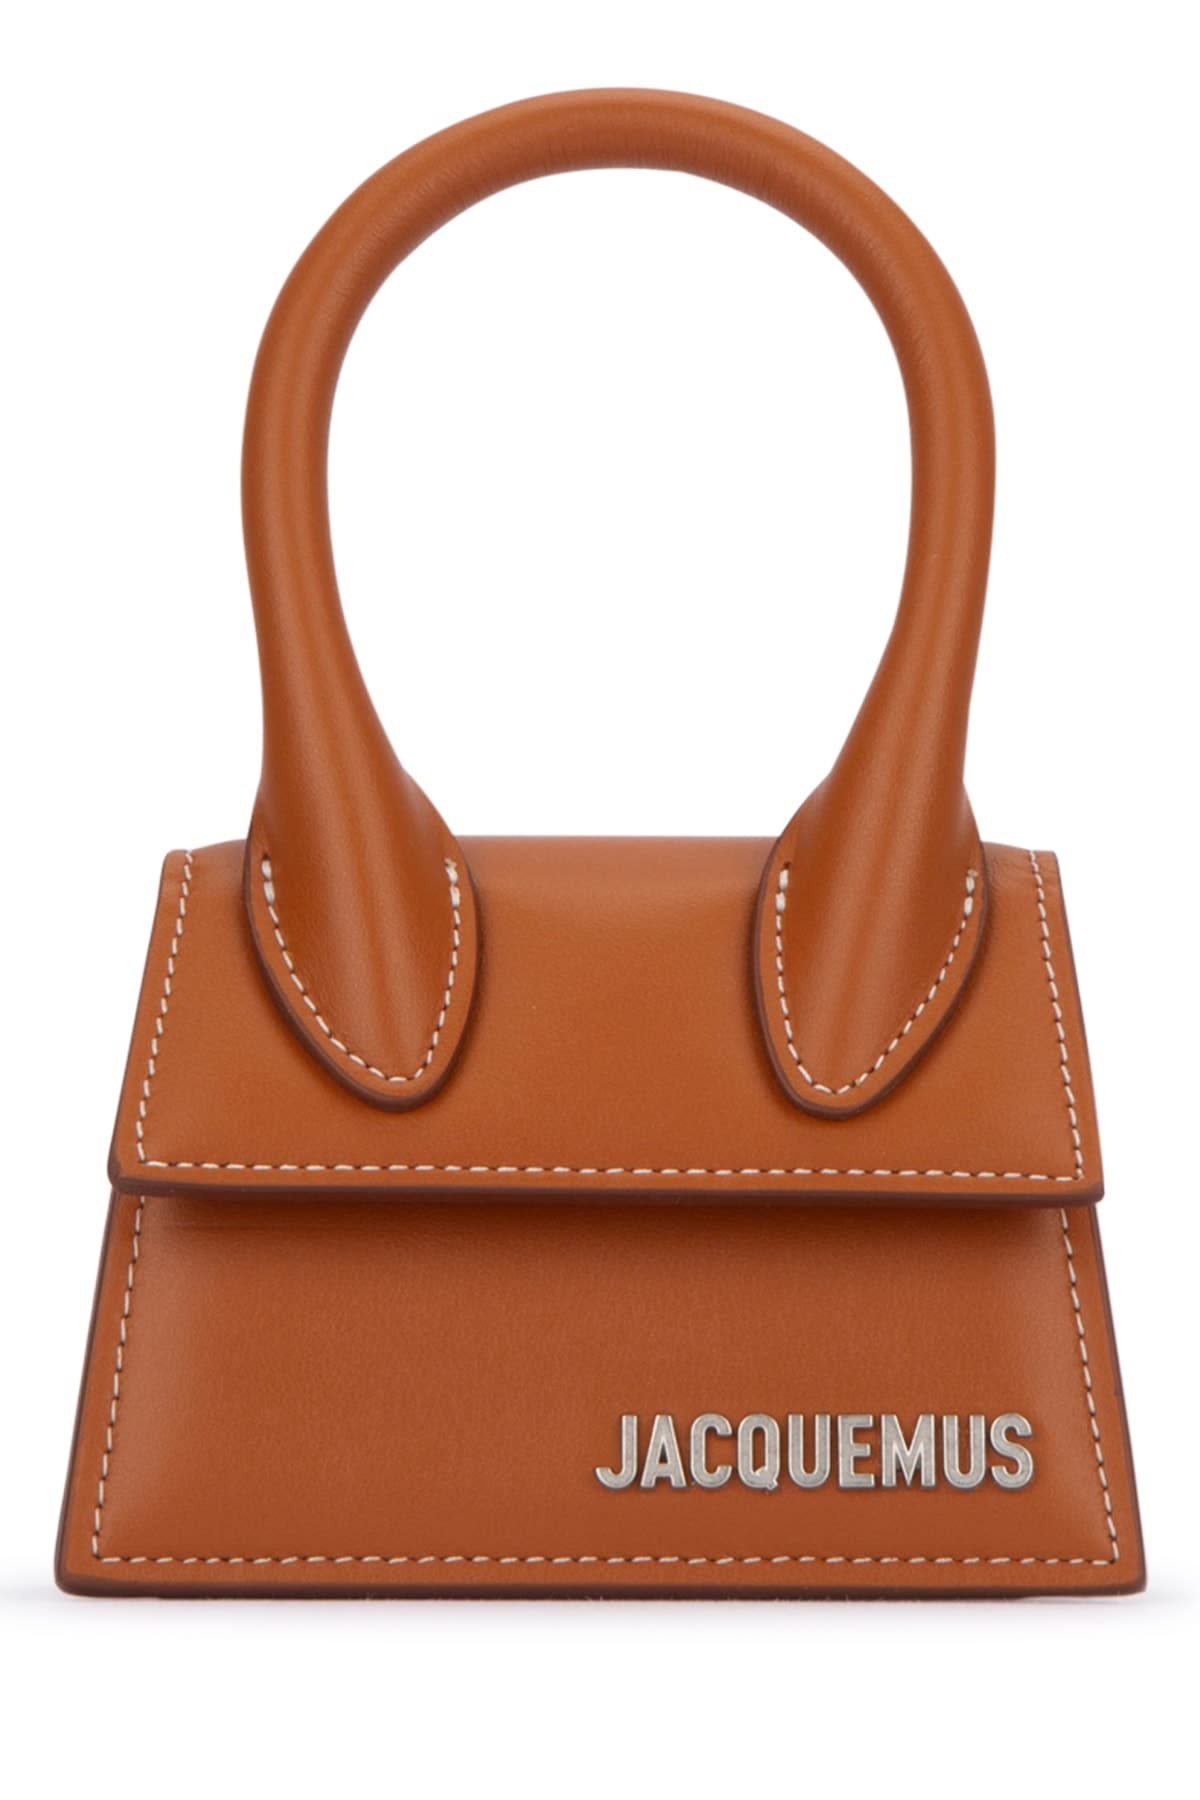 Jacquemus Le Chiquito Homme In Lightbrown2